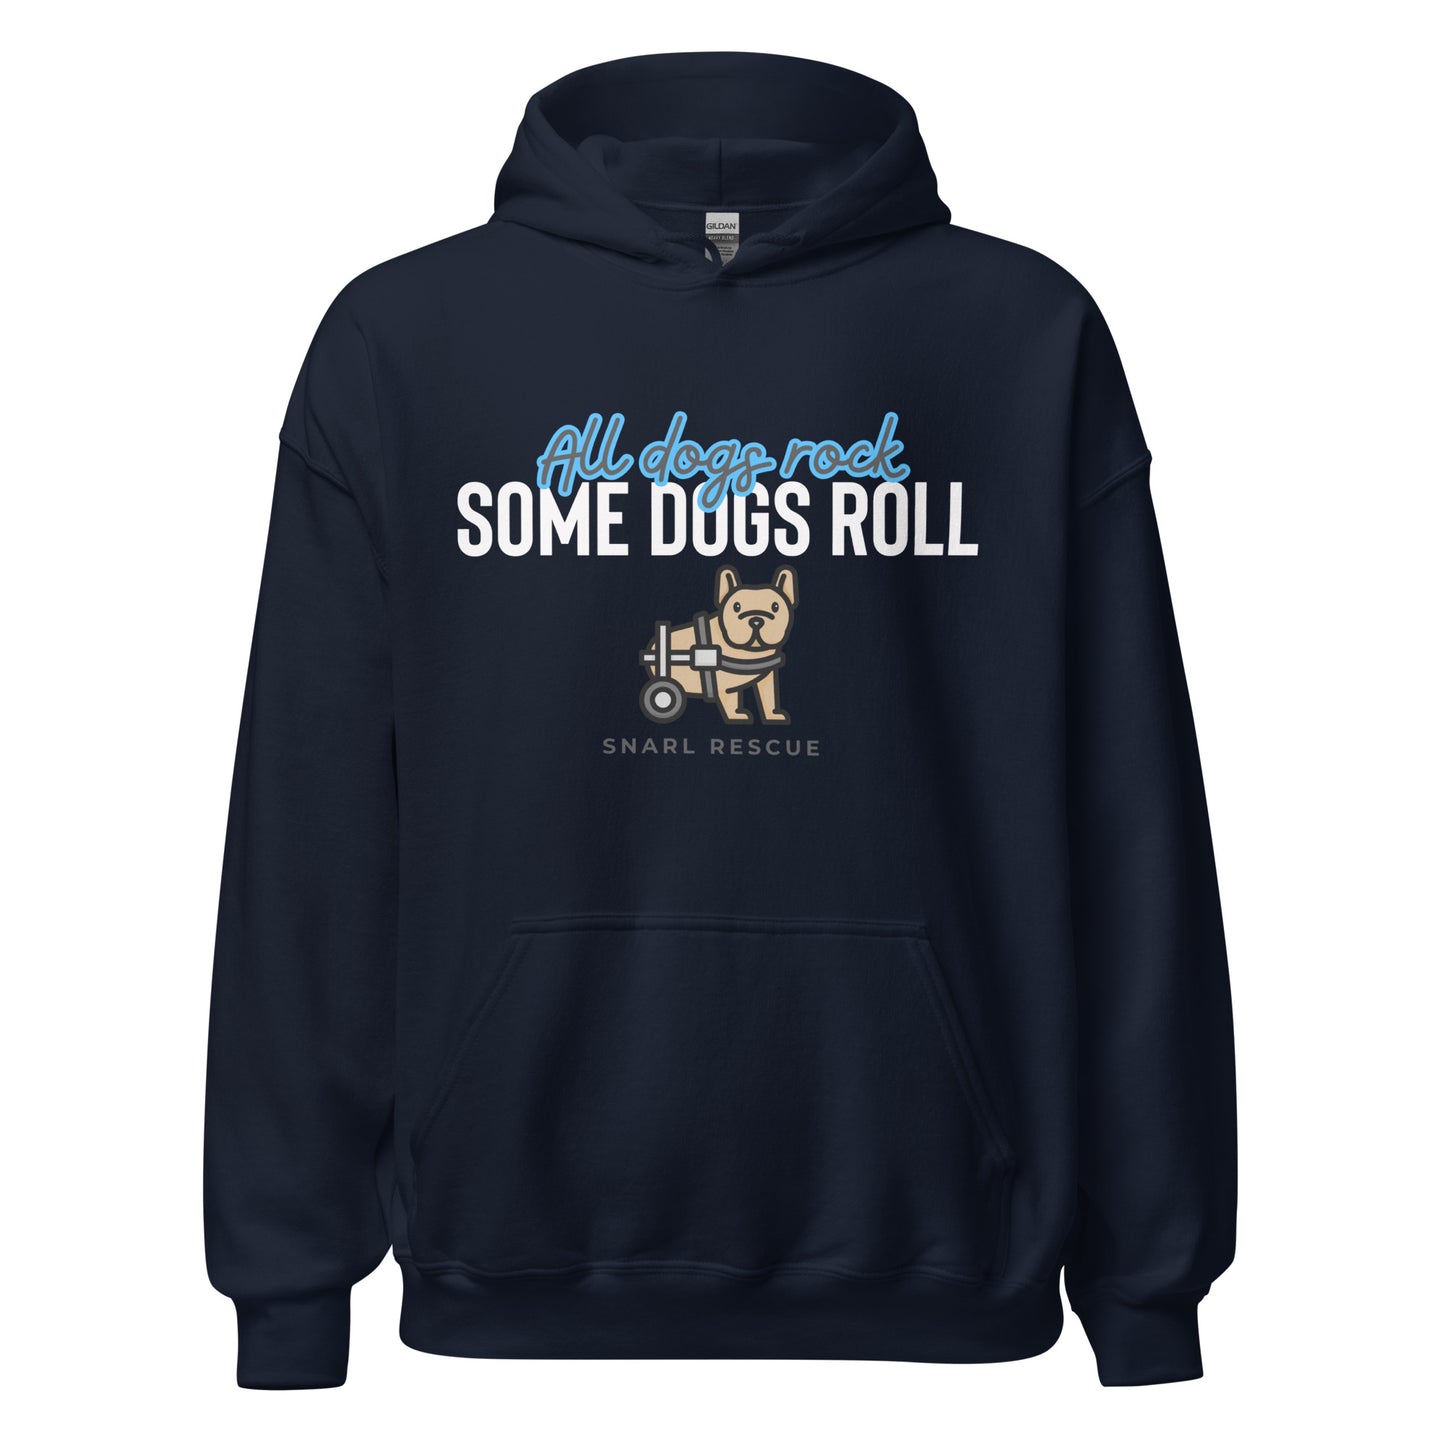 The "All Dogs Rock, Some Dogs Roll: Hoodie